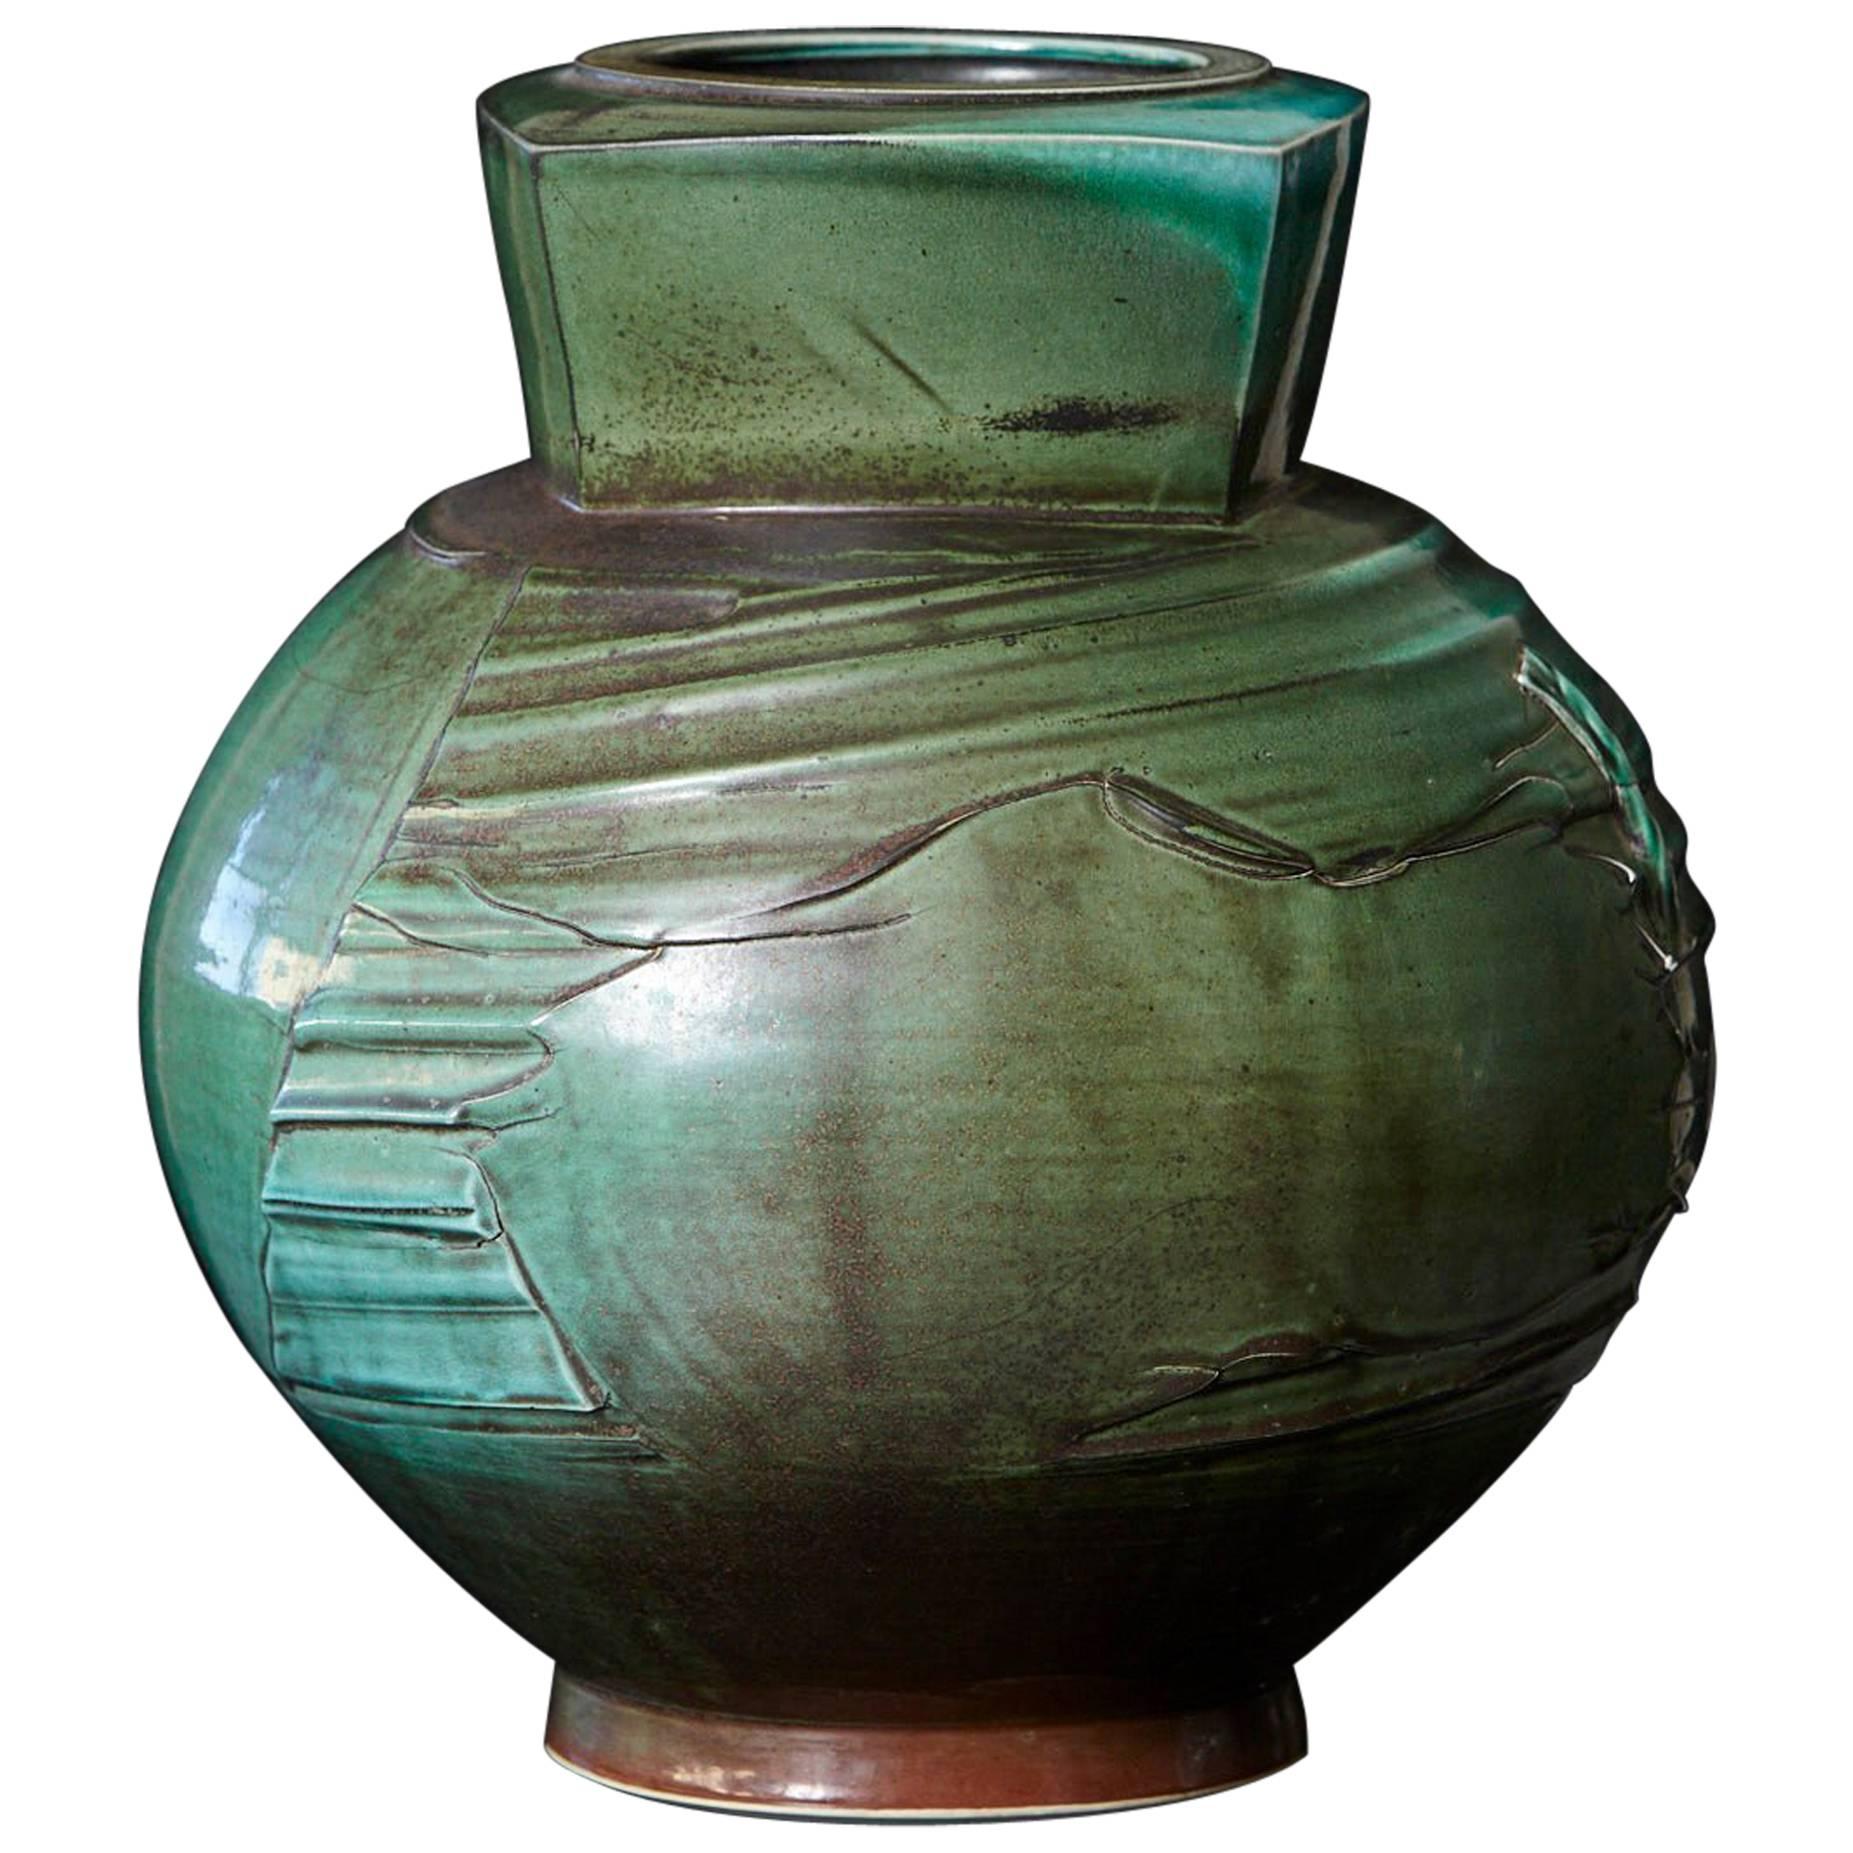 Chris Staley, Large Jar with Textured Surface in Mottled Green, Signed